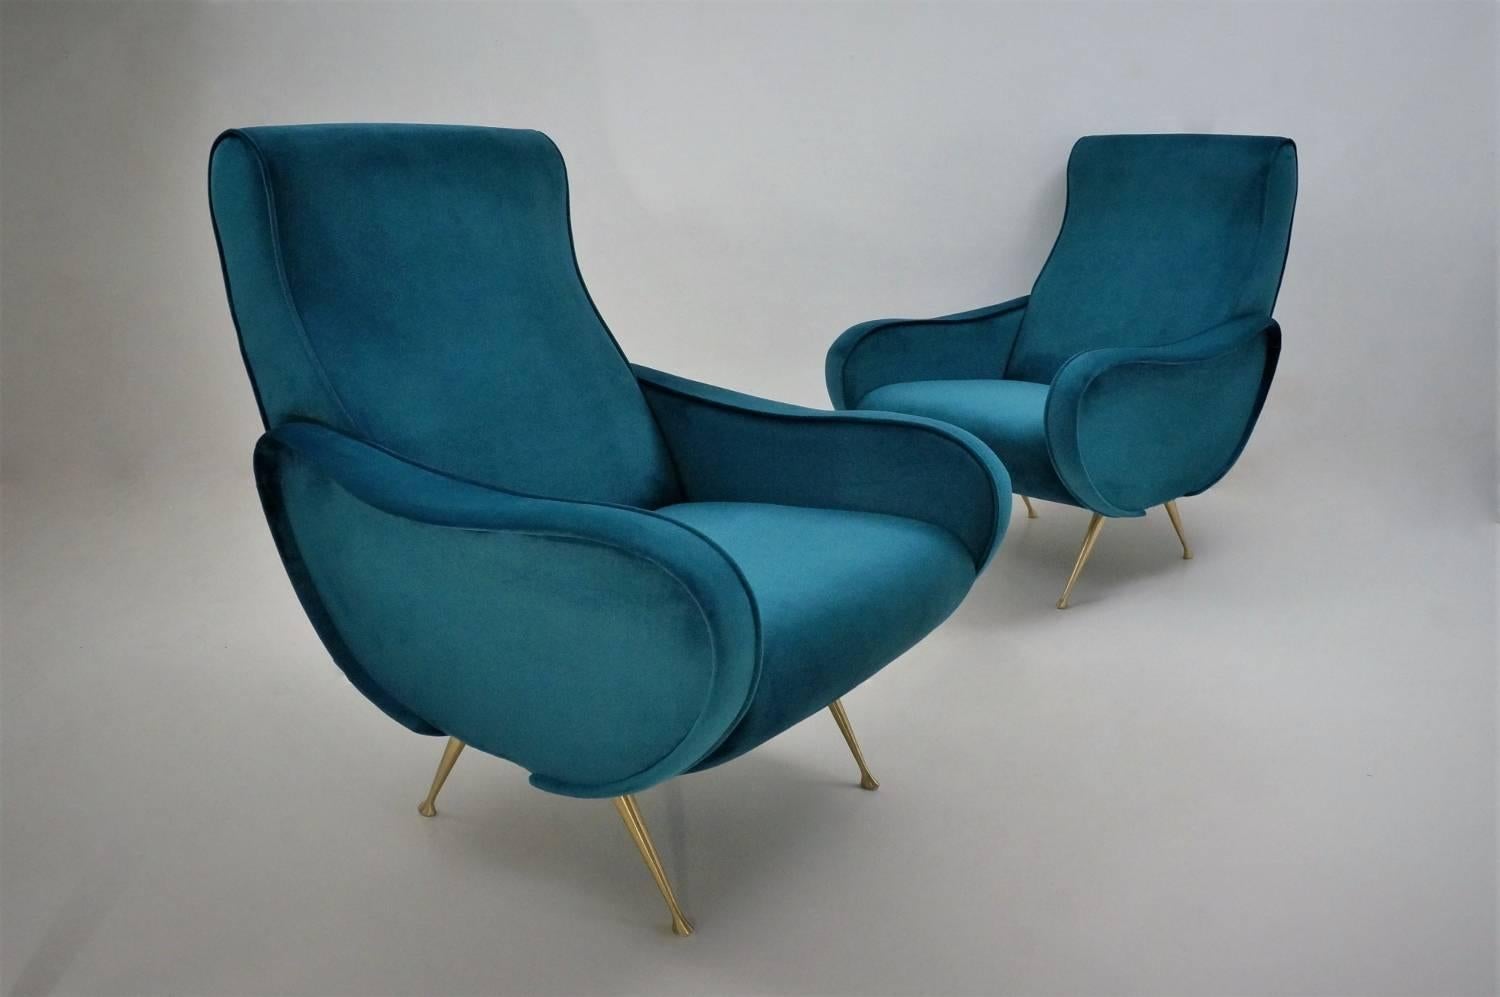 1950s Style Armchair Newly Made to Order in 25 Colors,  Italian For Sale 7